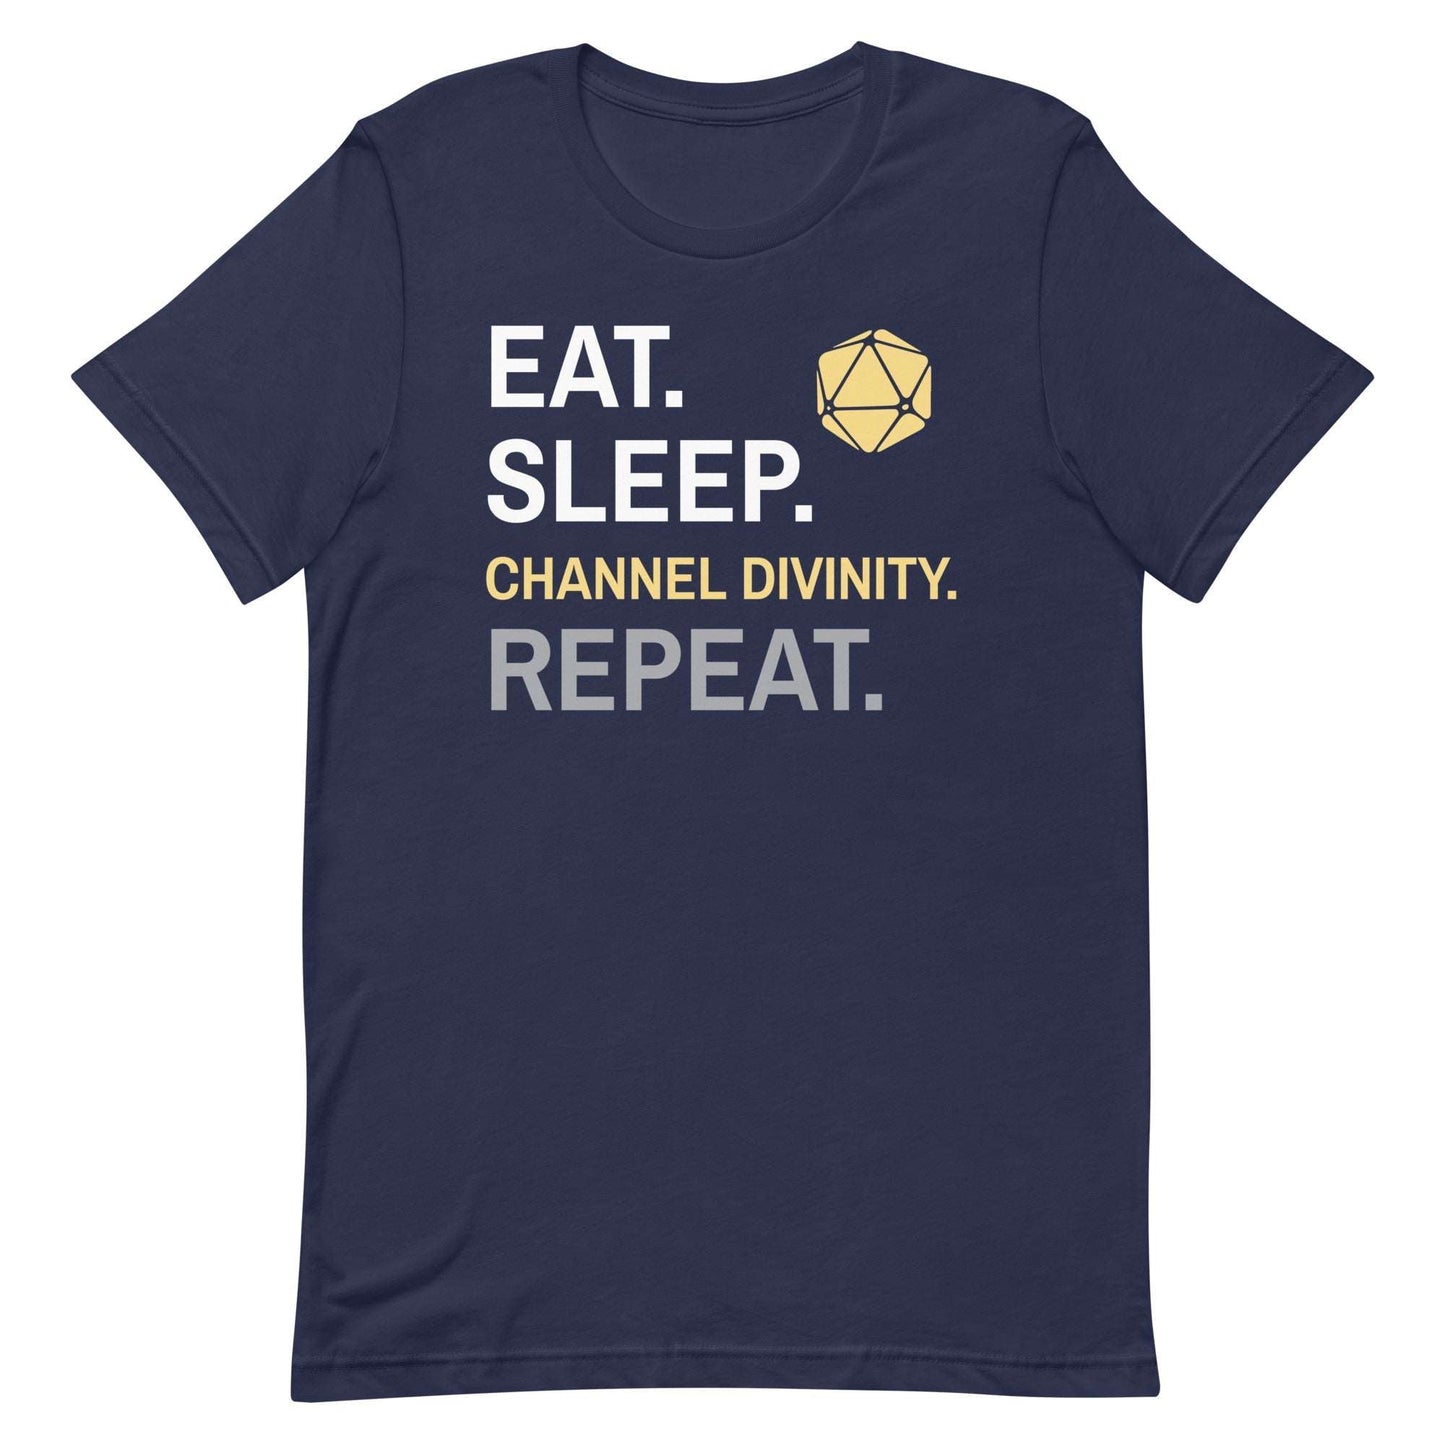 Cleric Class T-Shirt – 'Eat, Sleep, Channel Divinity, Repeat' – Dungeons & Dragons Cleric Class Apparel T-Shirt Navy / S